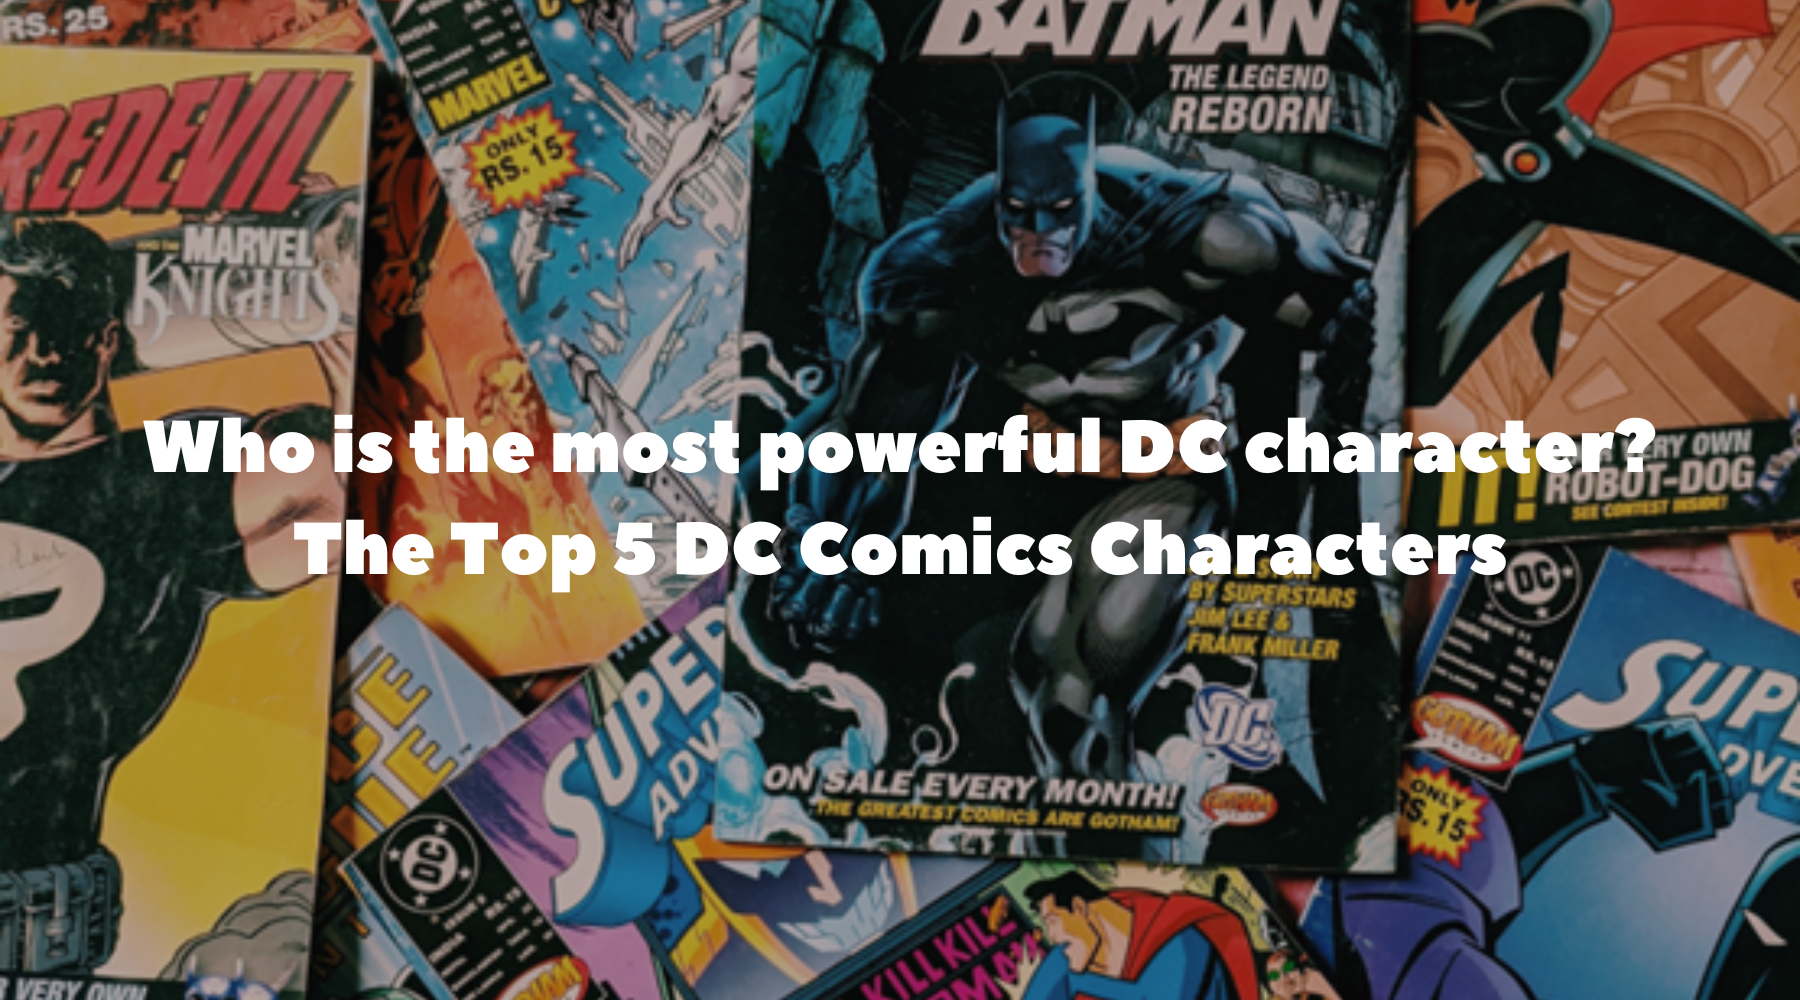 Who is the most powerful DC character? The Top 5 DC Comics Characters